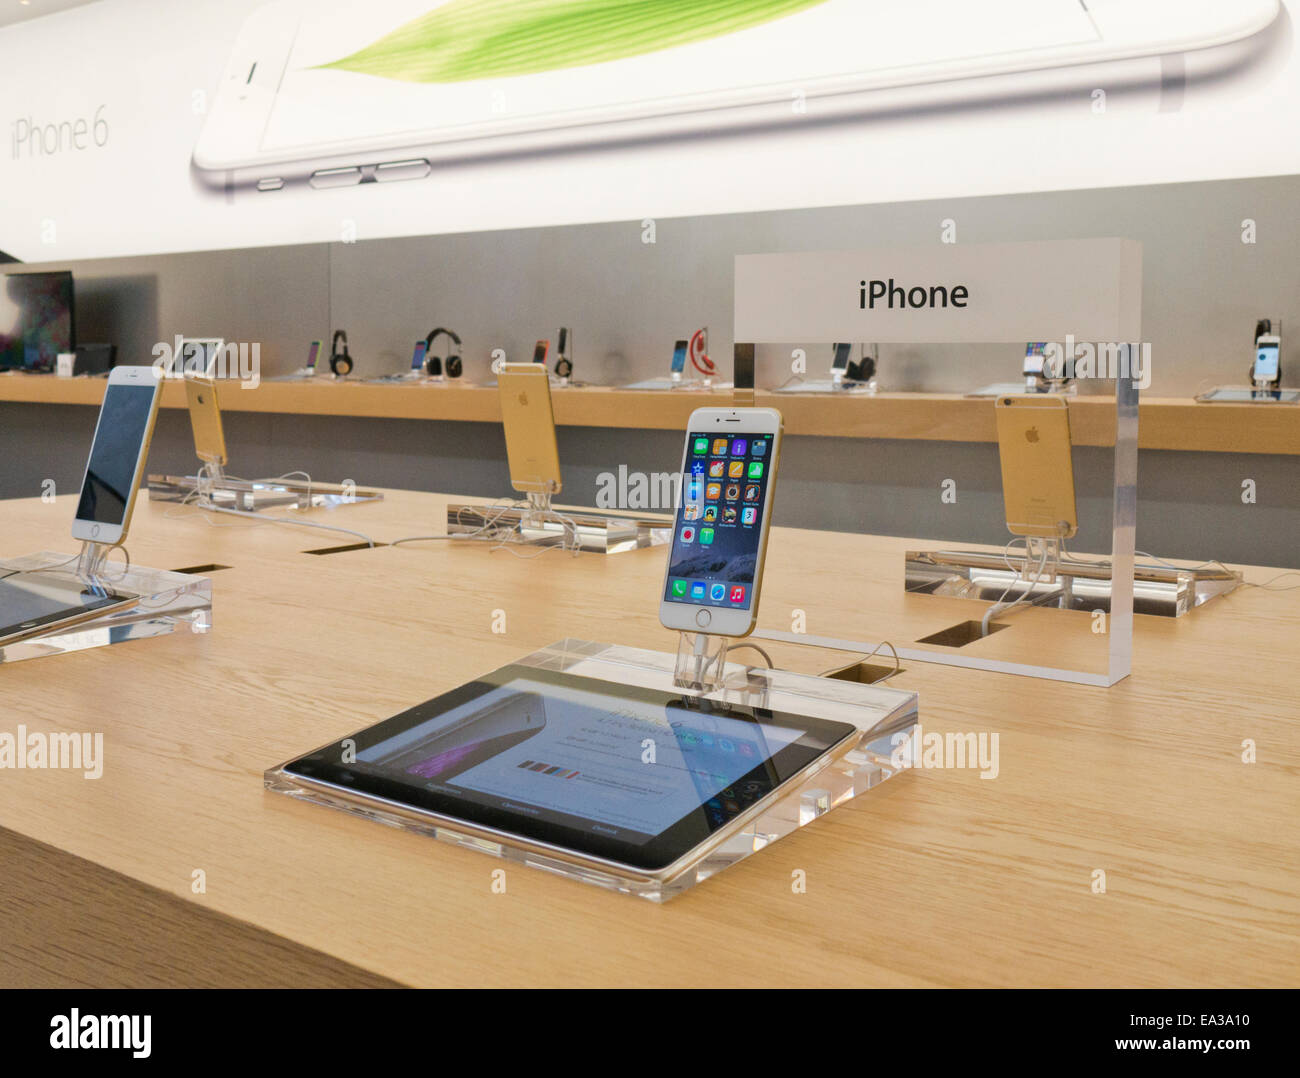 The Apple iPhone 6 on display in the Apple store Stock Photo - Alamy